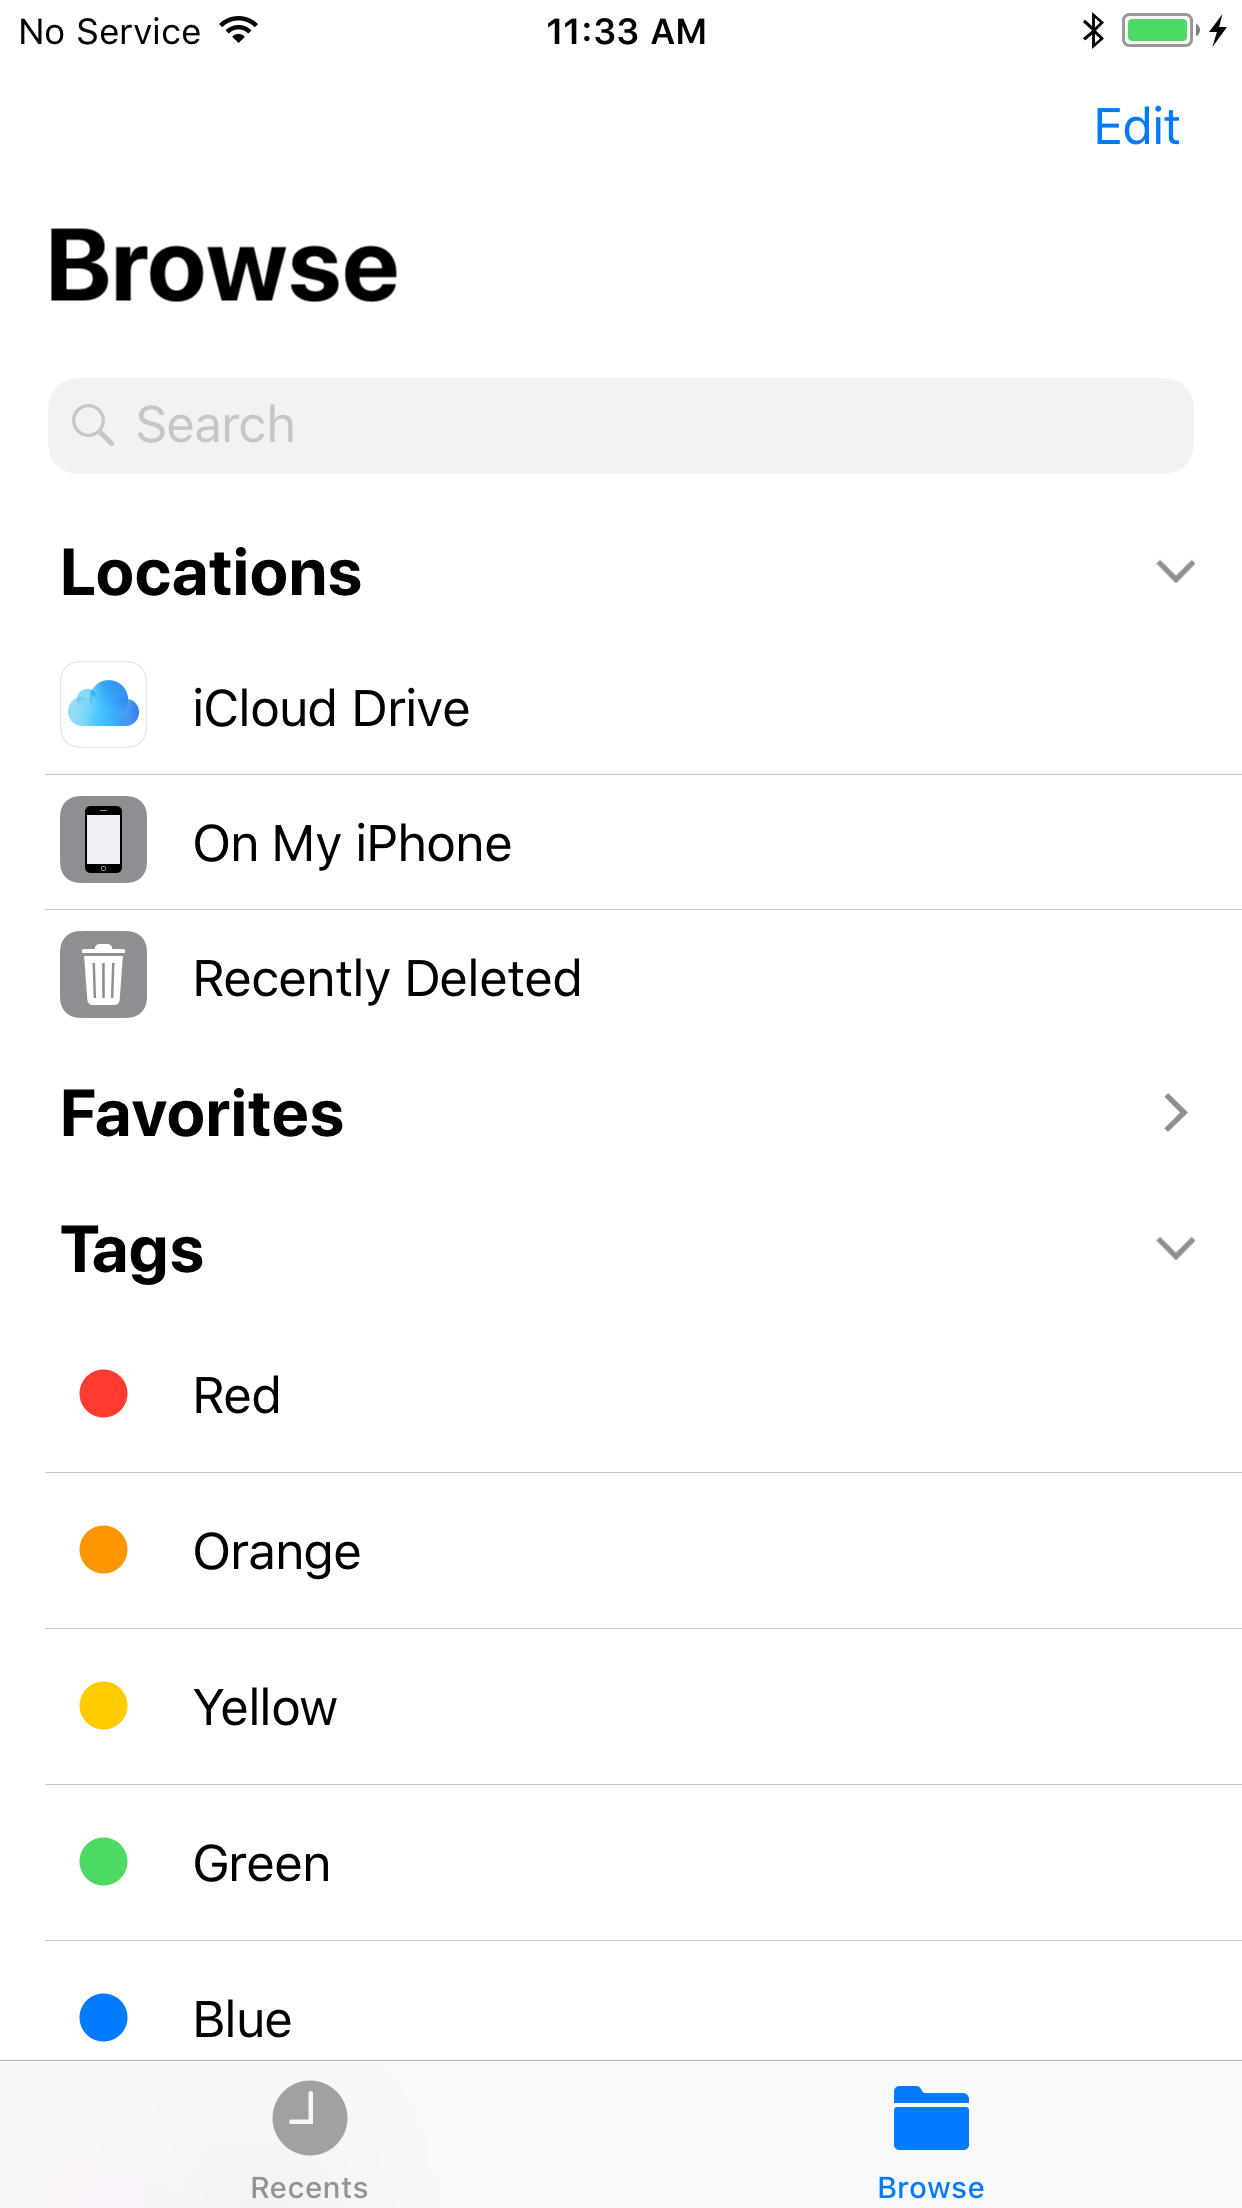 How to Use the New Files App on iOS 11?